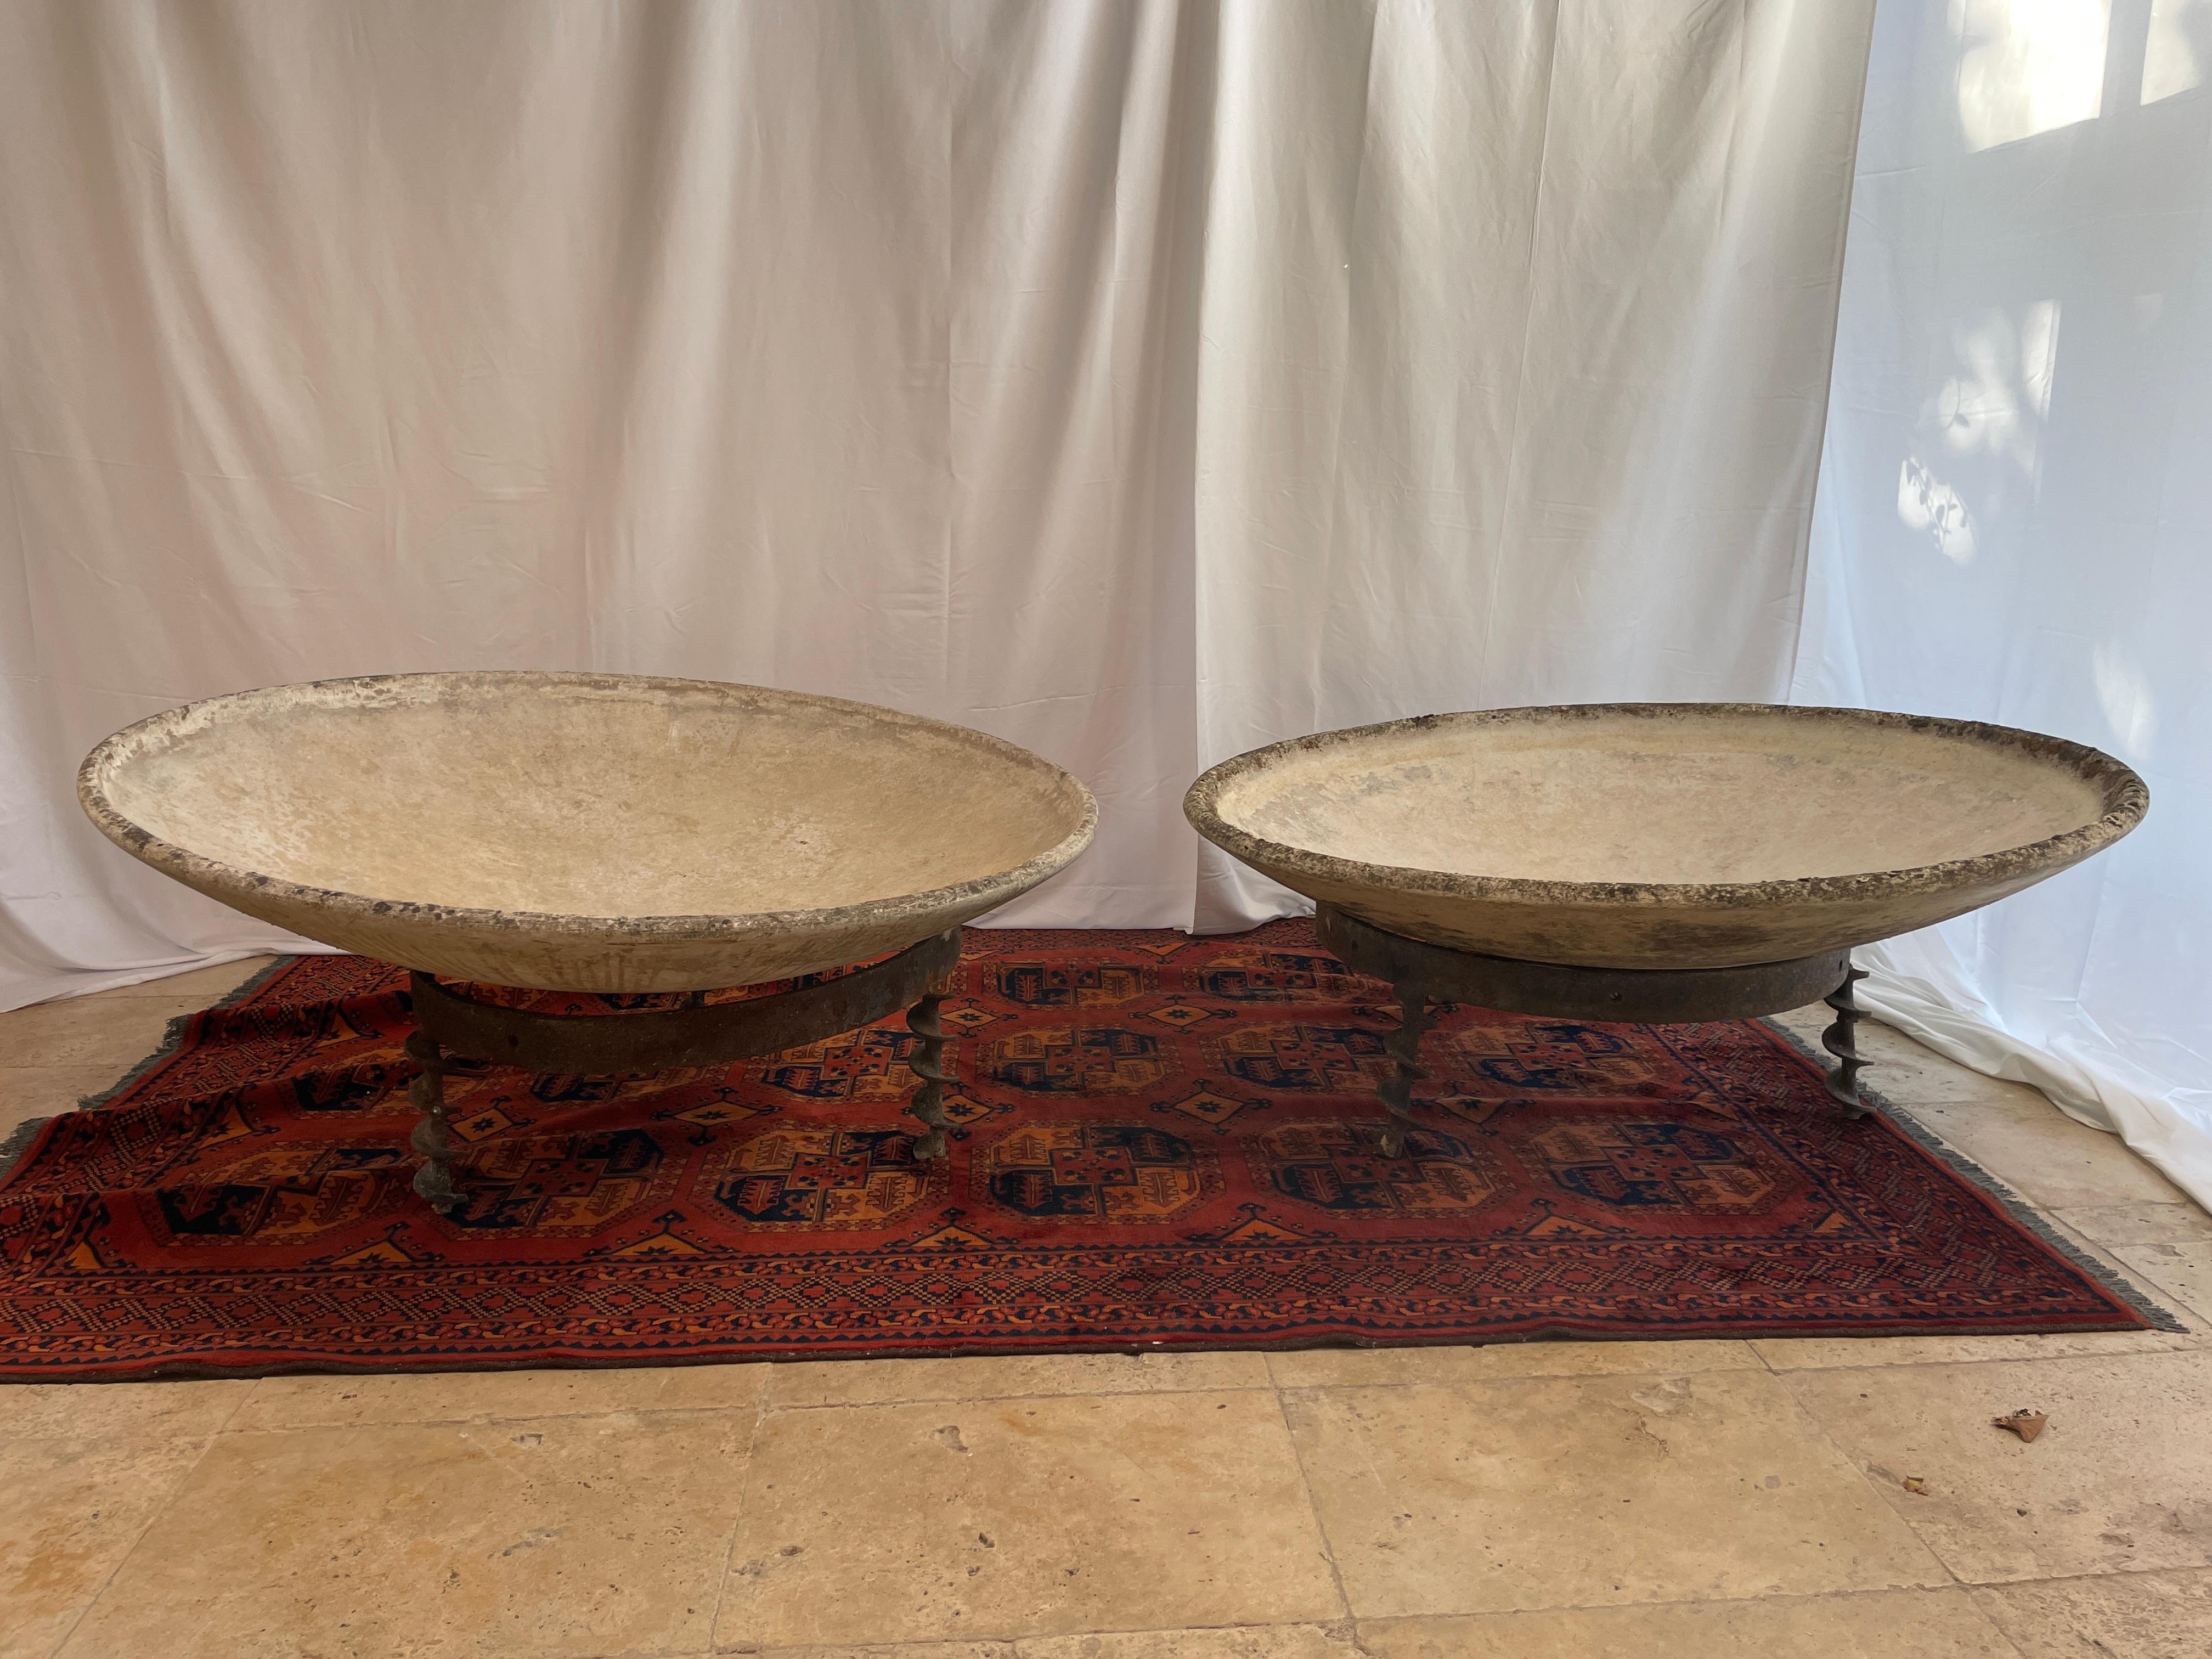 Pair of Monumental bowl planters with steel stand by Willy Guhl 59' inch , I have more of them , soon here 
After they stopped manufacturing, many people threw their Willy Guhl's in the garbage. 
Each piece by the use of time and by their former